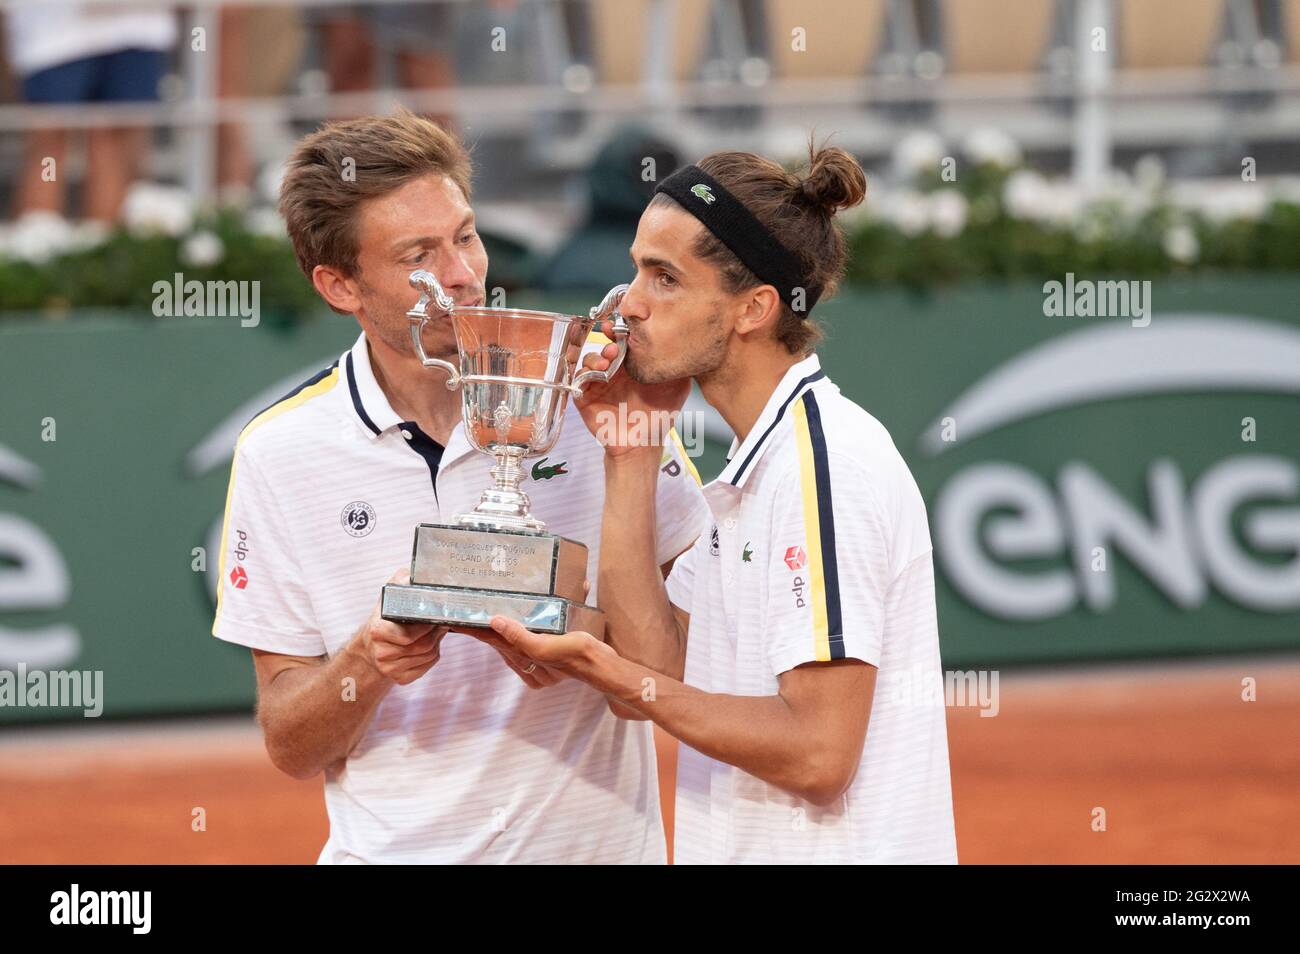 Paris, France. 12th June, 2021. Pierre-Hugues Herbert and Nicolas Mahut  during the 2021 French Open at Roland Garros on June 12, 2021 in Paris,  France. Photo by Laurent Zabulon/ABACAPRESS.COM Credit: Abaca Press/Alamy